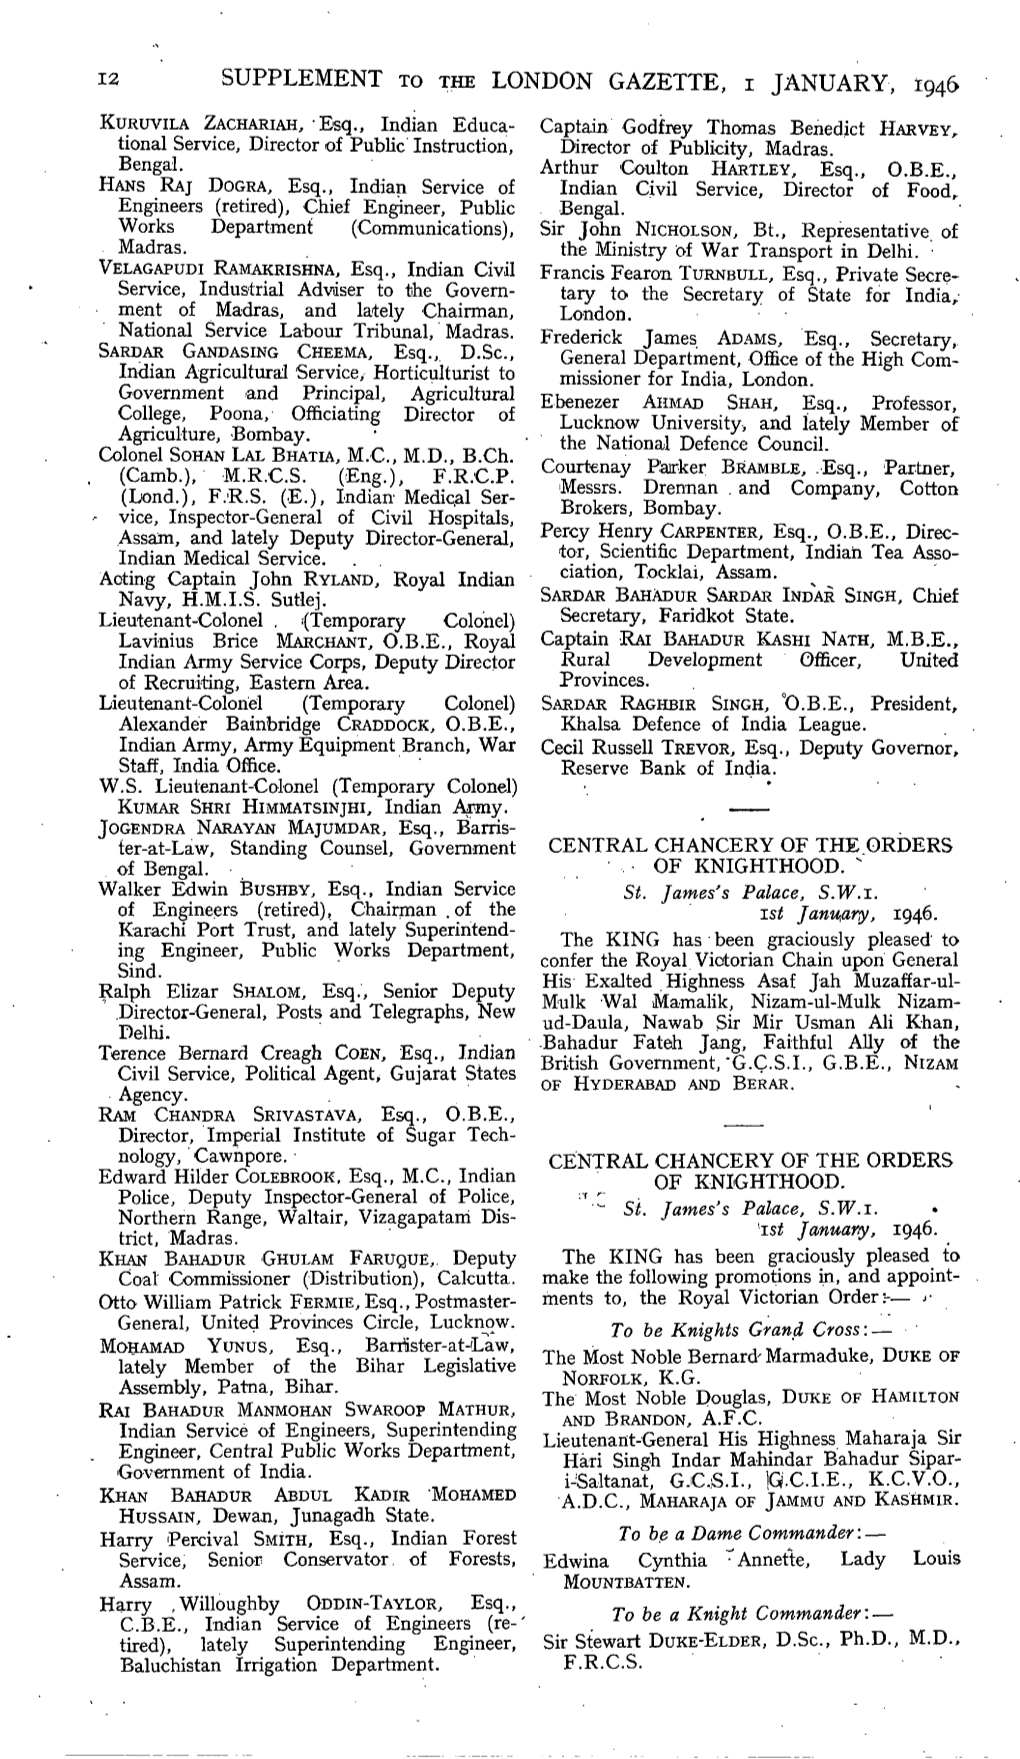 SUPPLEMENT to the LONDON GAZETTE, I JANUARY, 1946